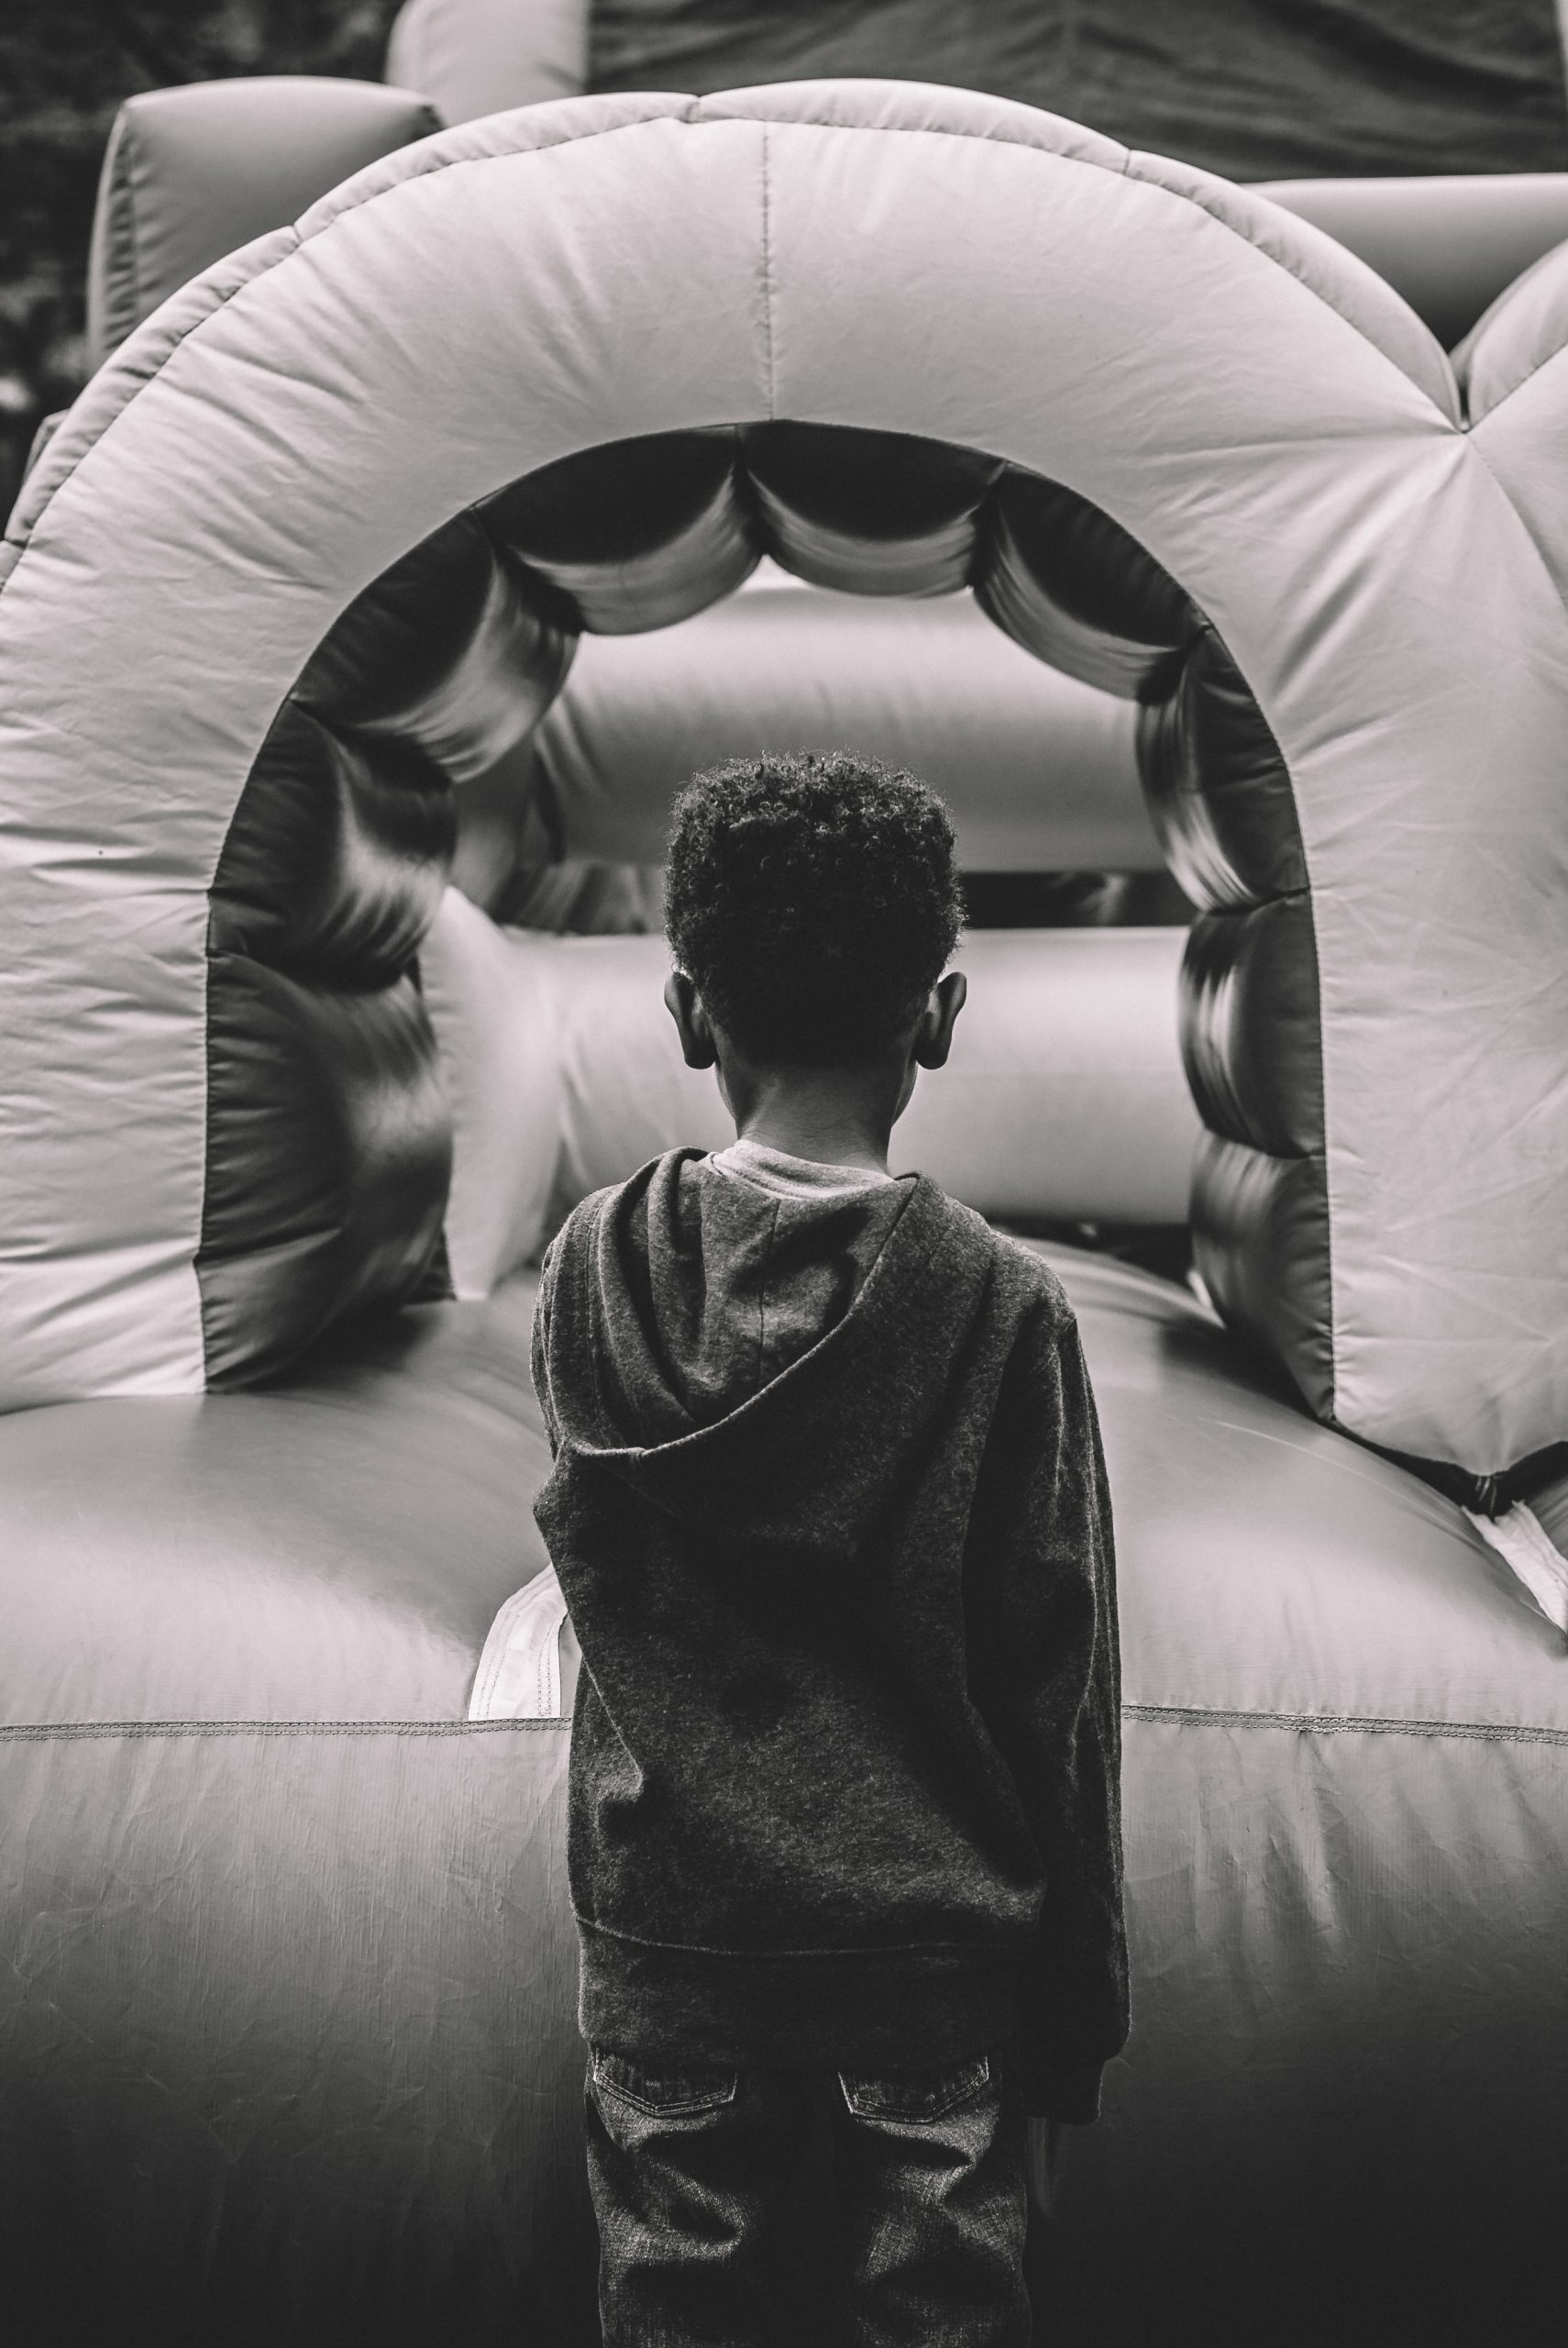 Bounce house rental in Baltimore